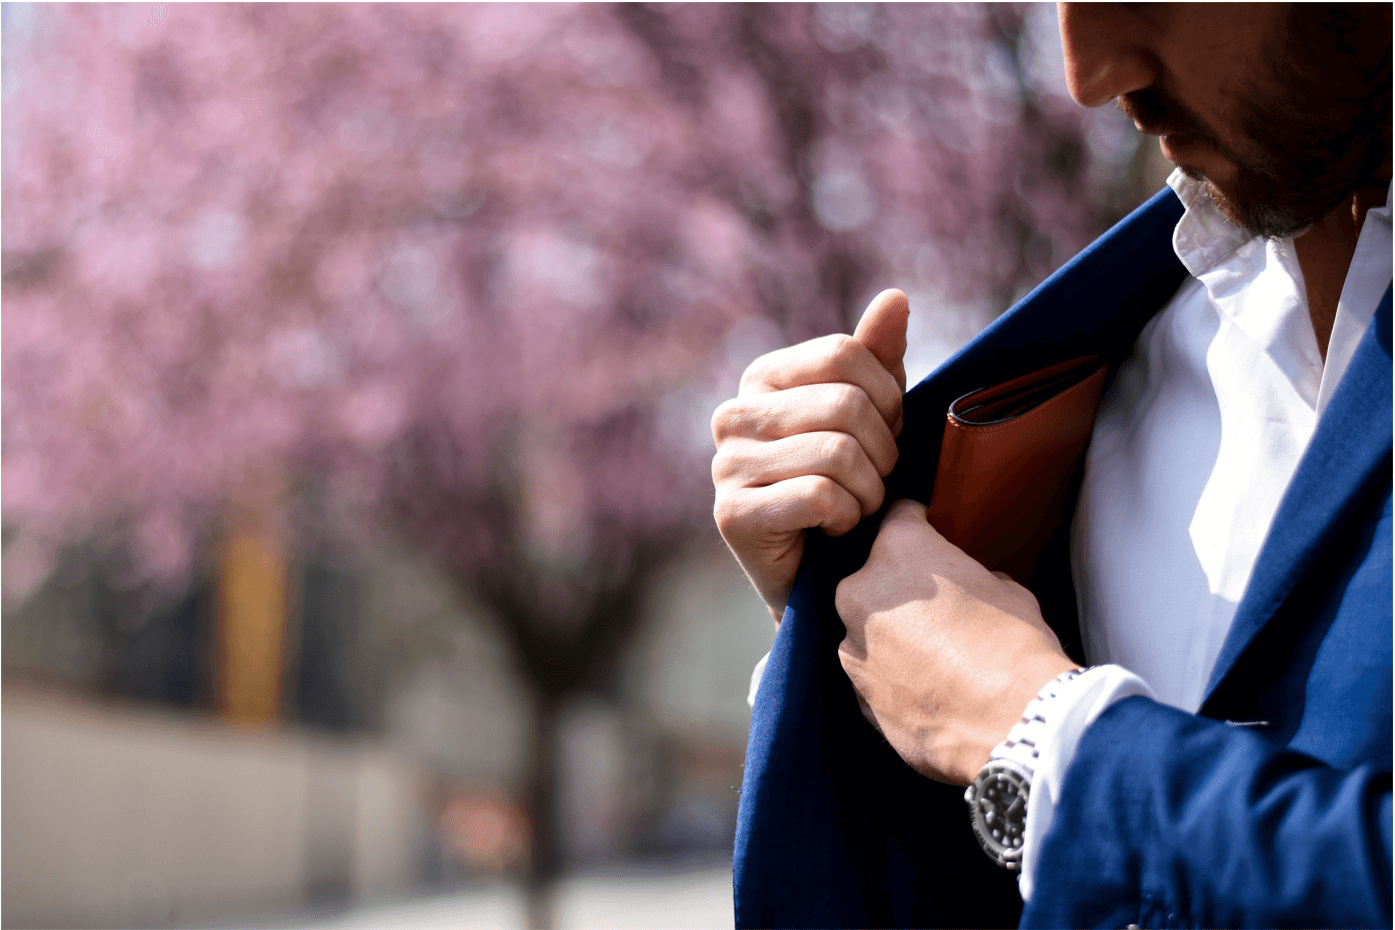 A man in a blue suit puts something away in an interior jacket pocket. He stands in front of a cherry blossom tree.